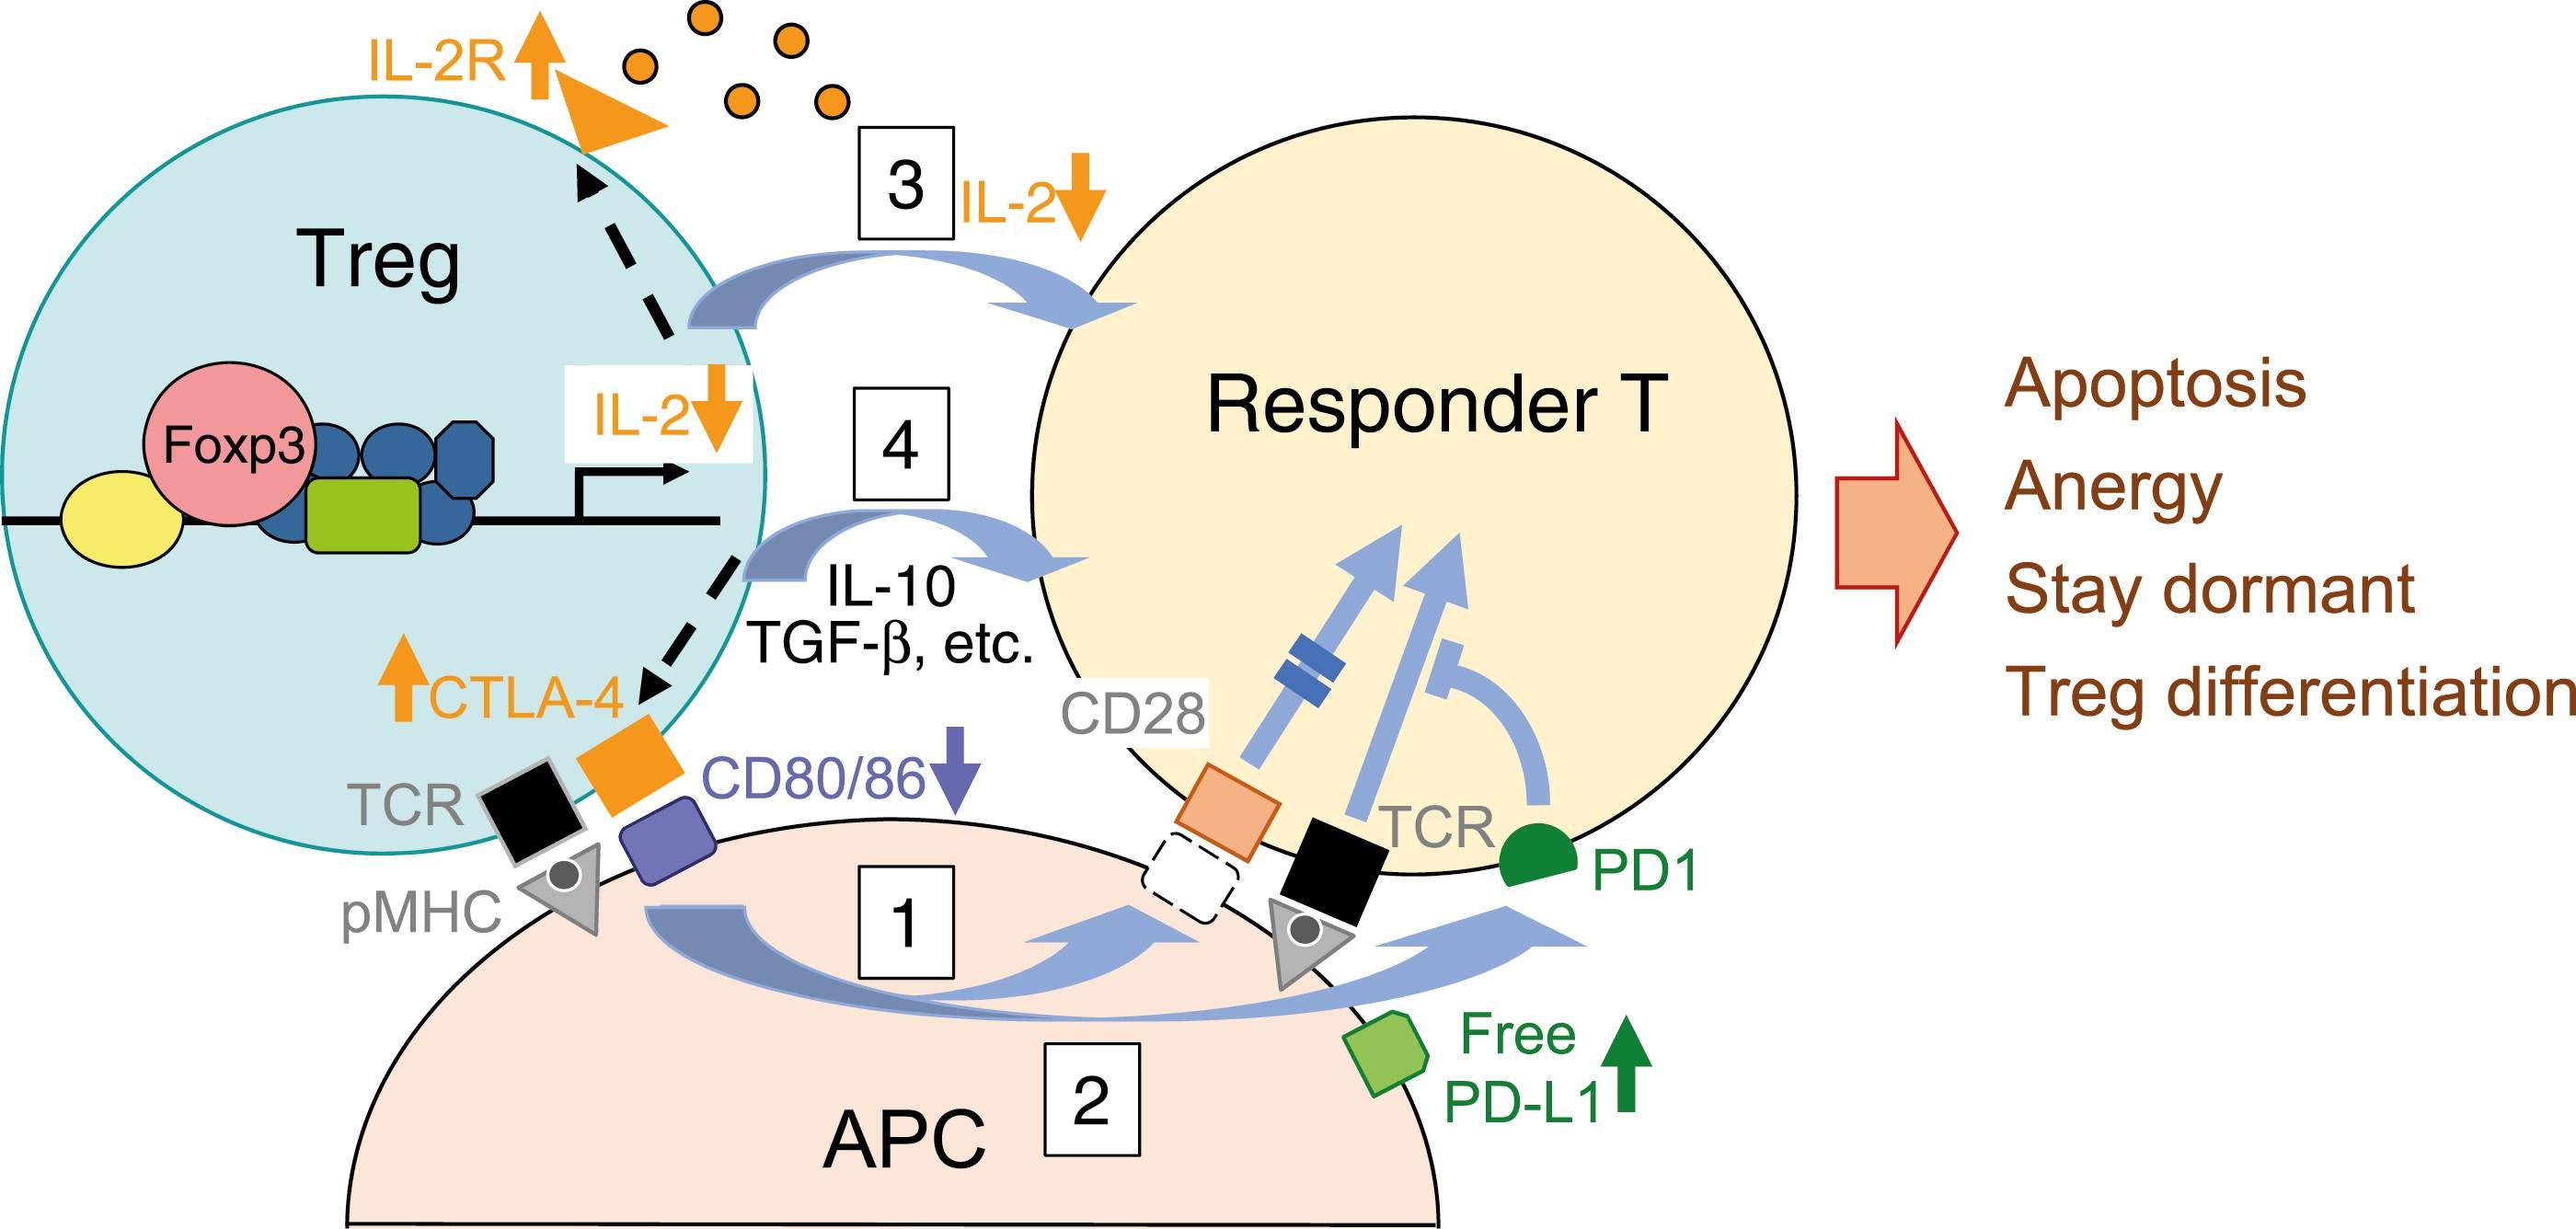 Figure showing Treg-mediated suppressive mechanisms and cell fates of responder T cells subjected to suppression